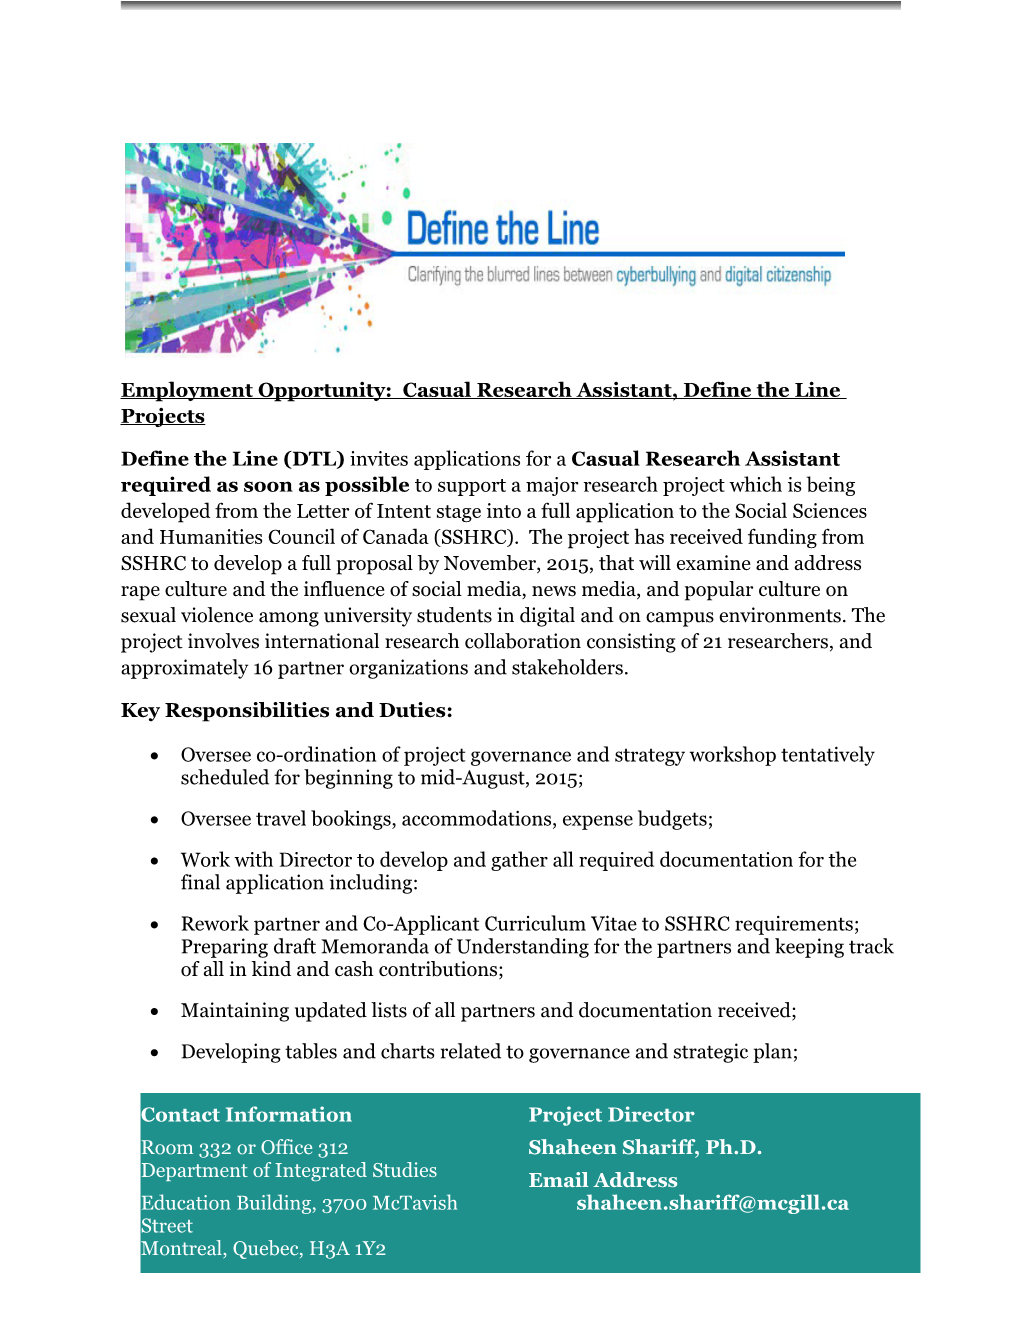 Employment Opportunity: Casual Research Assistant, Define the Line Projects